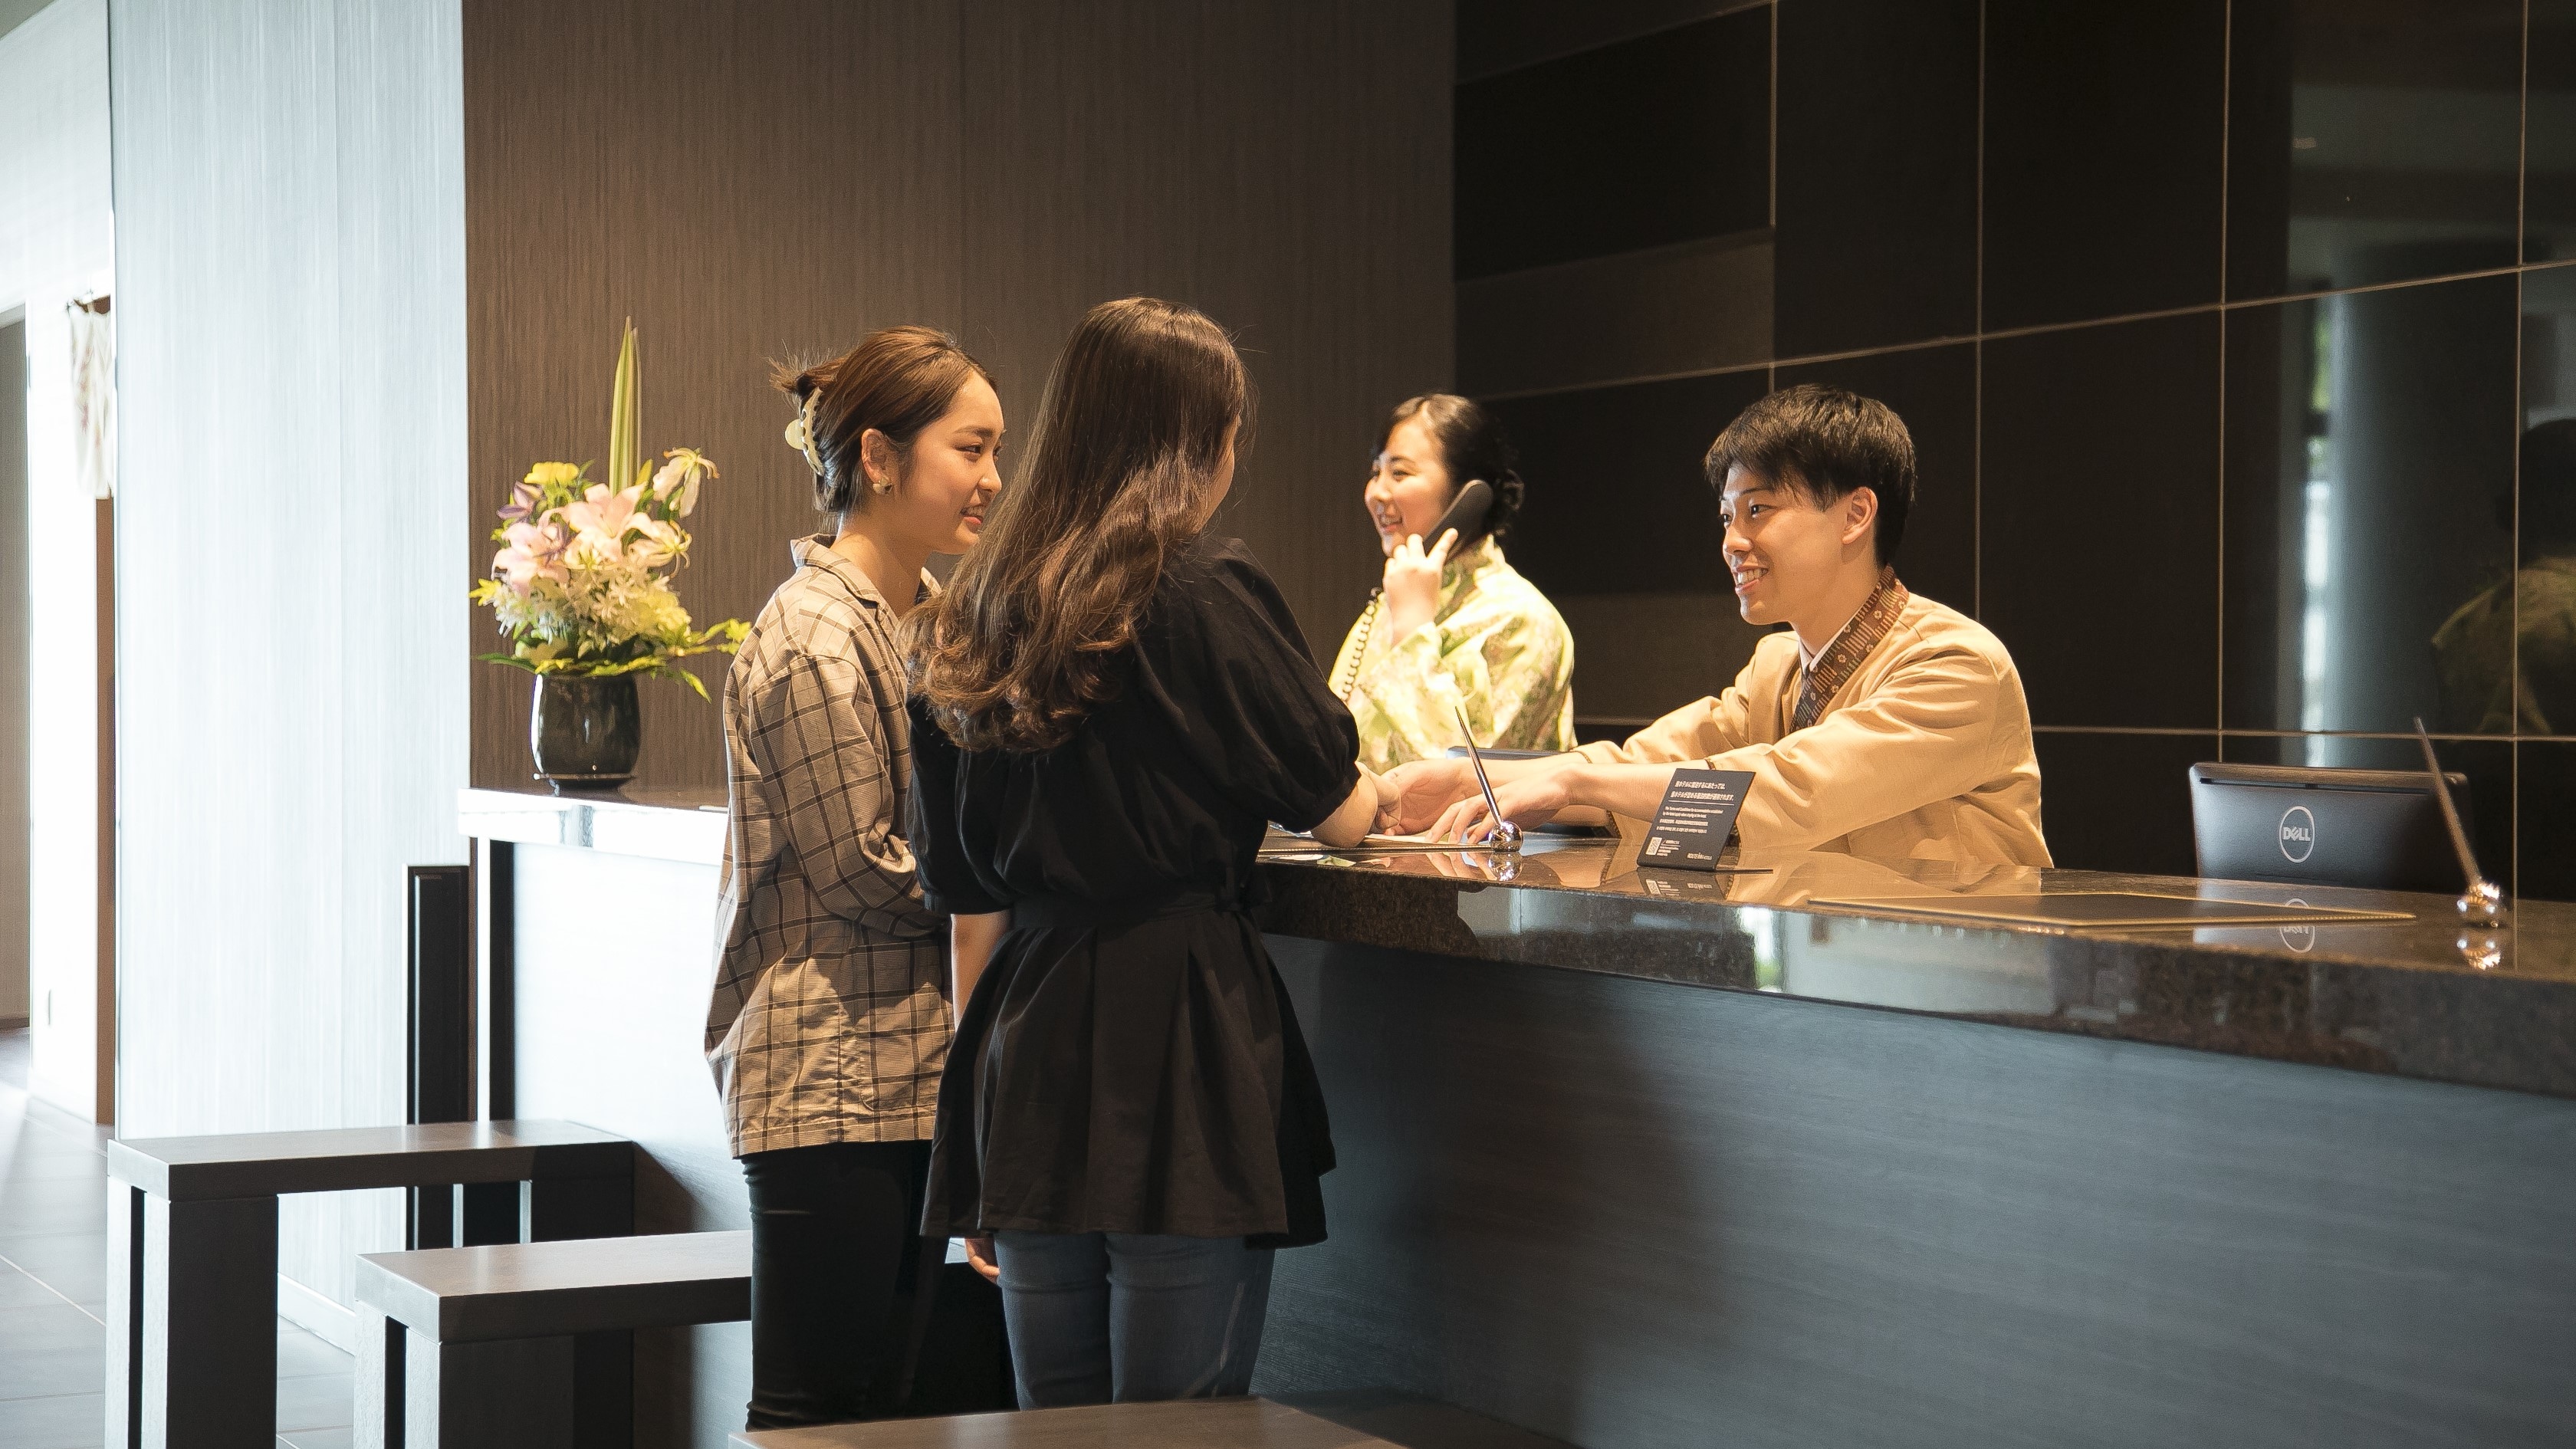 ■ All the staff will welcome you with a smile. [Luggage storage] is available before and after check-in.